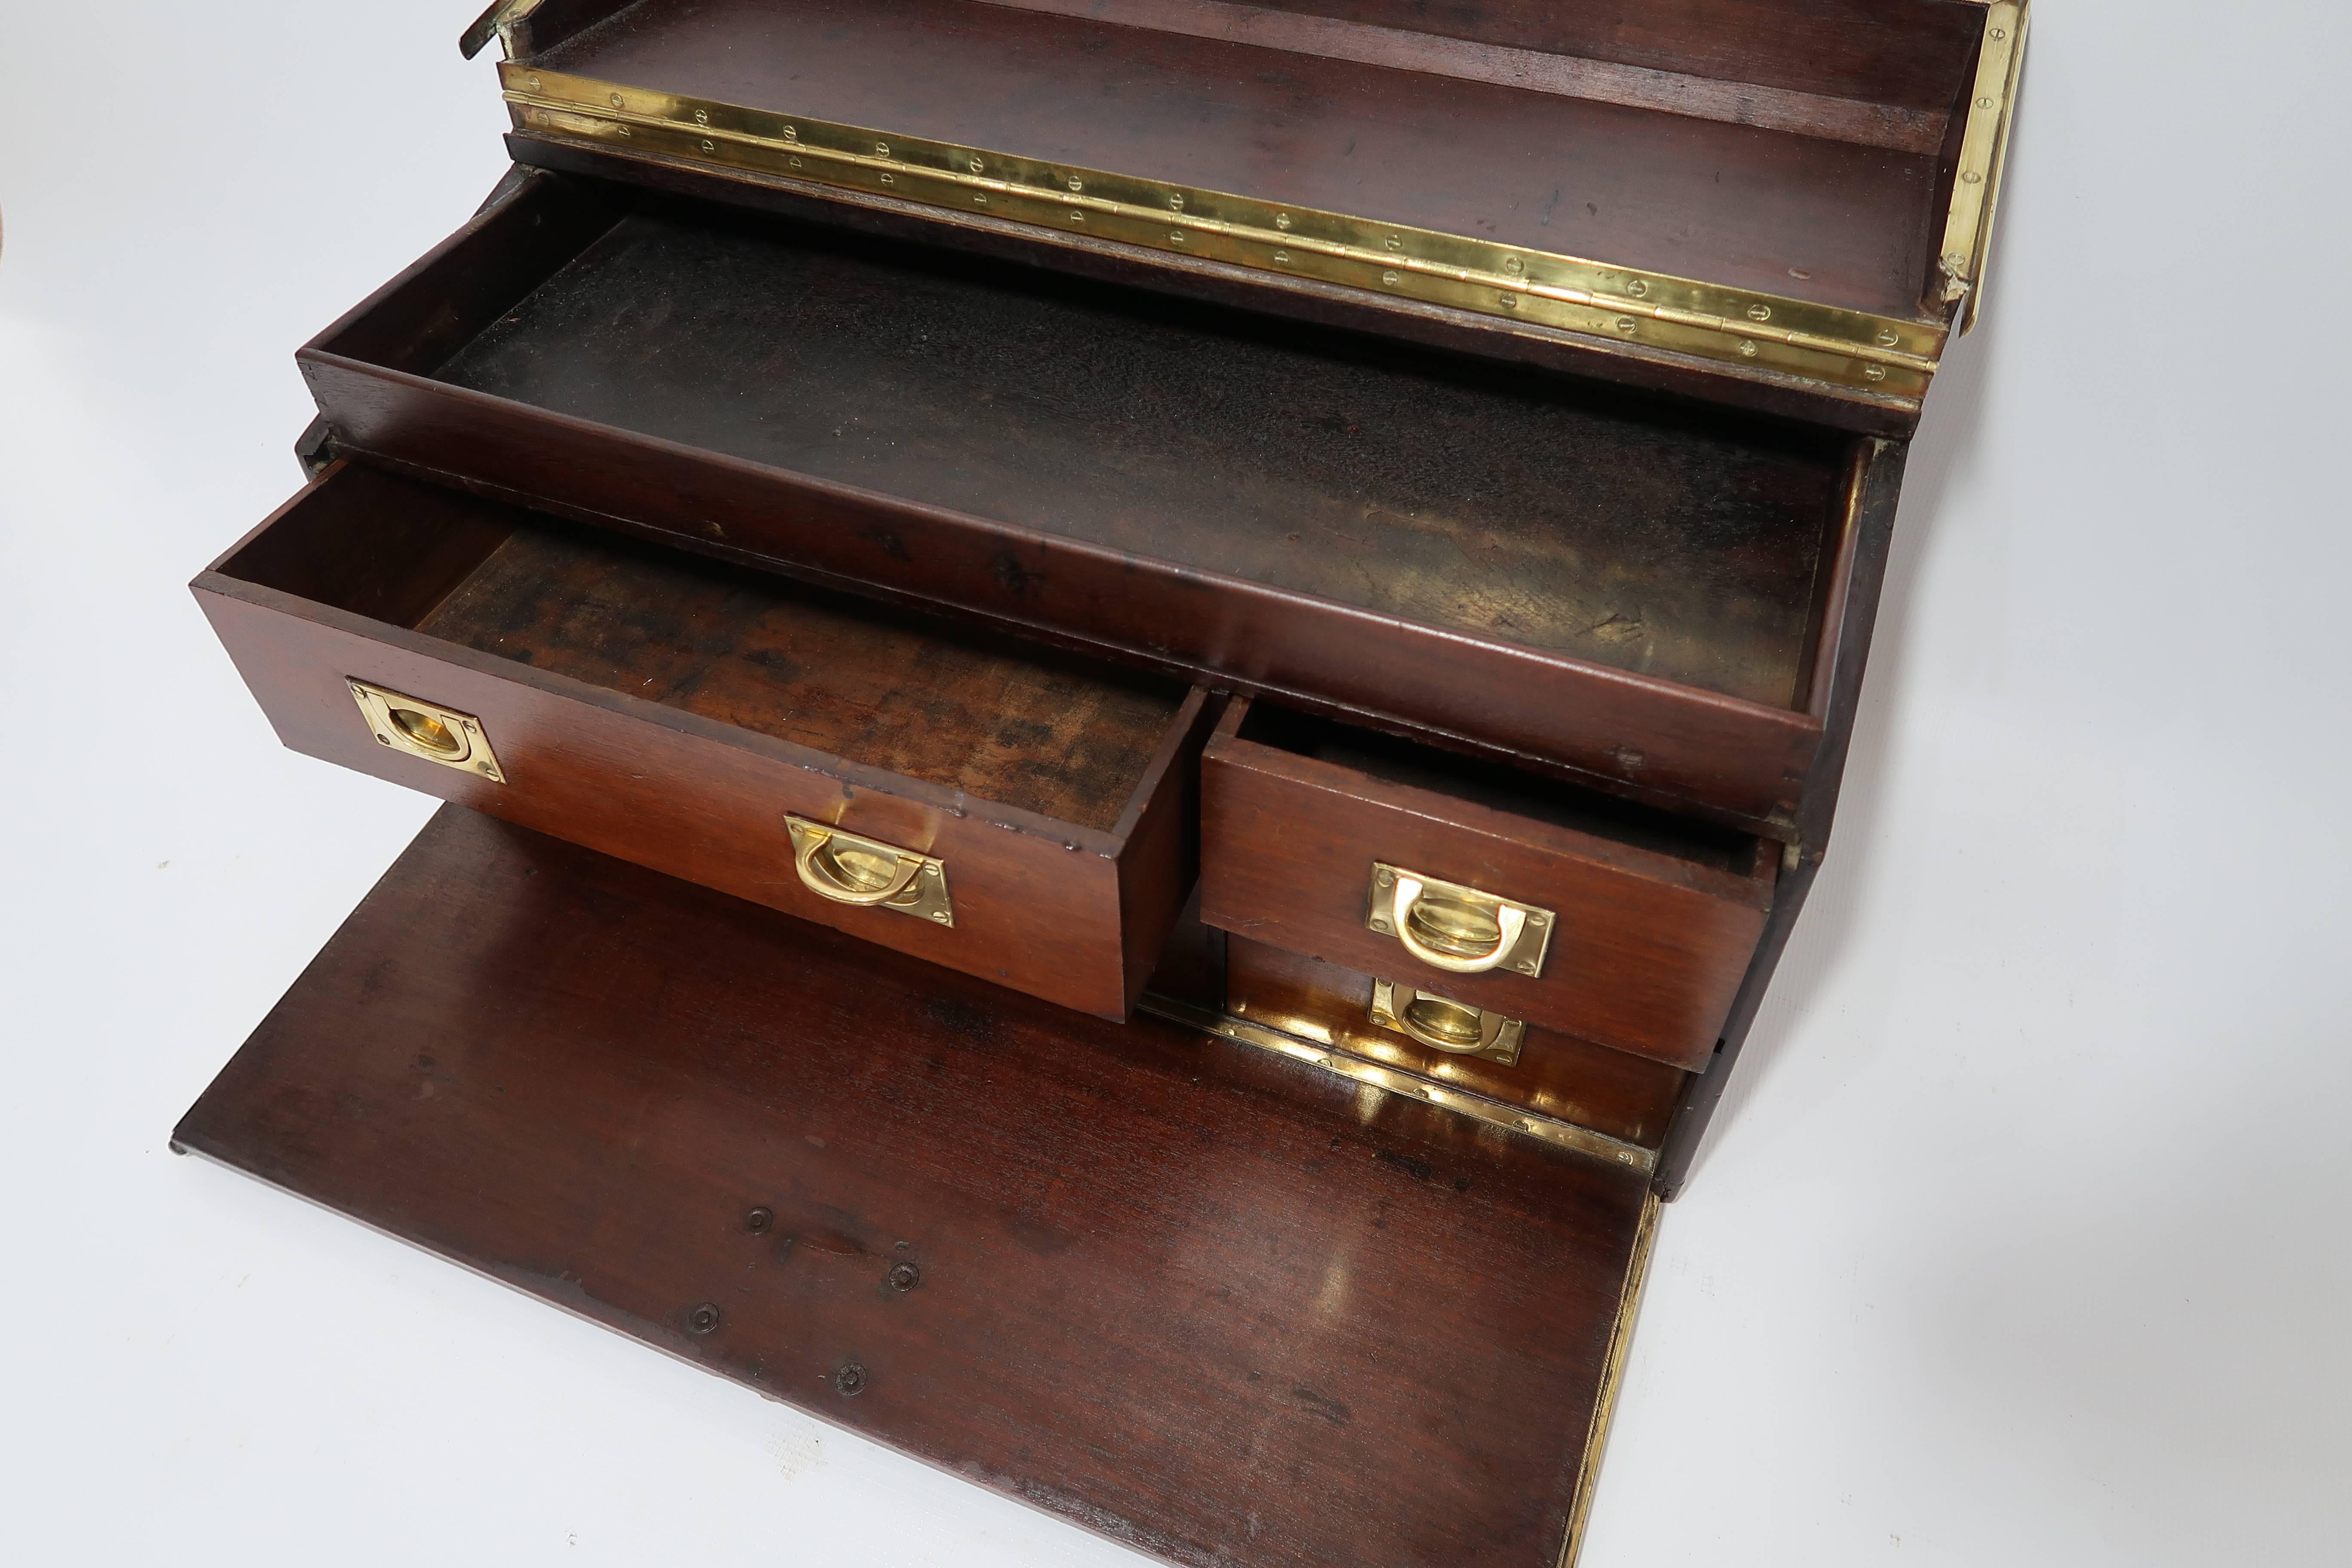 Brass 1890s Louis Vuitton Wooden Tool Box Trunk, 1 of the 100 Legendary Trunks For Sale